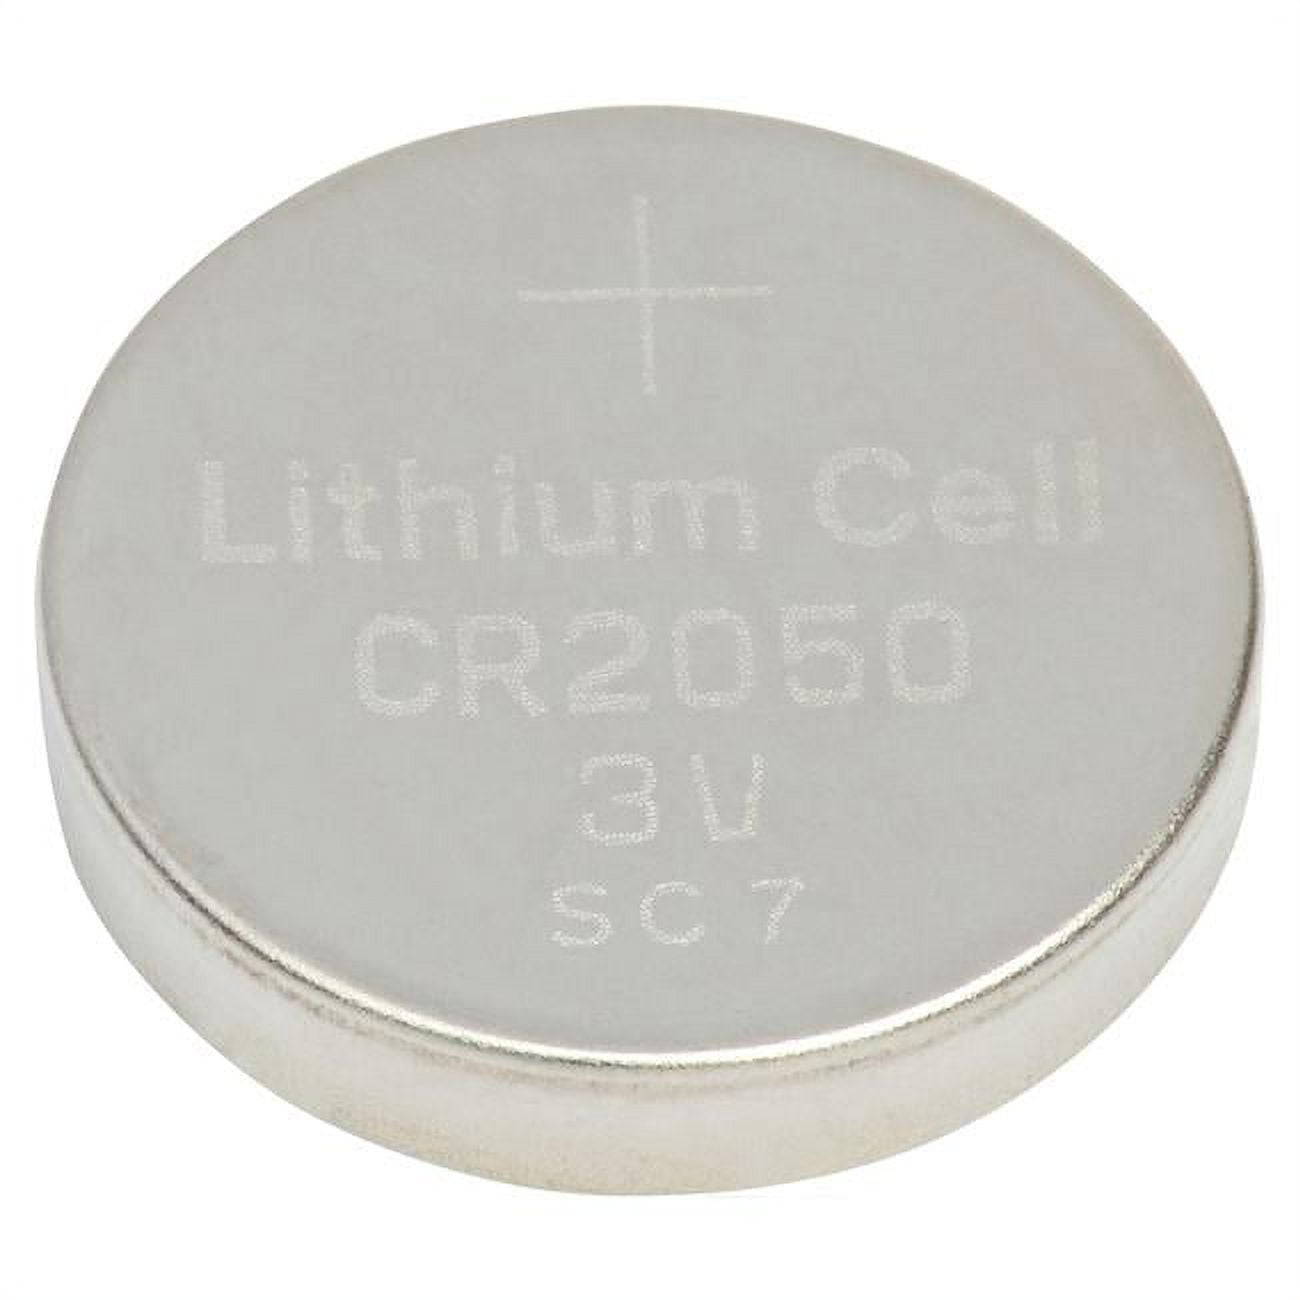 LITH-55 3V & 290 mAh Replacement Lithium Battery for CR2050, Interstate - WAC0004 -  PANASONIC